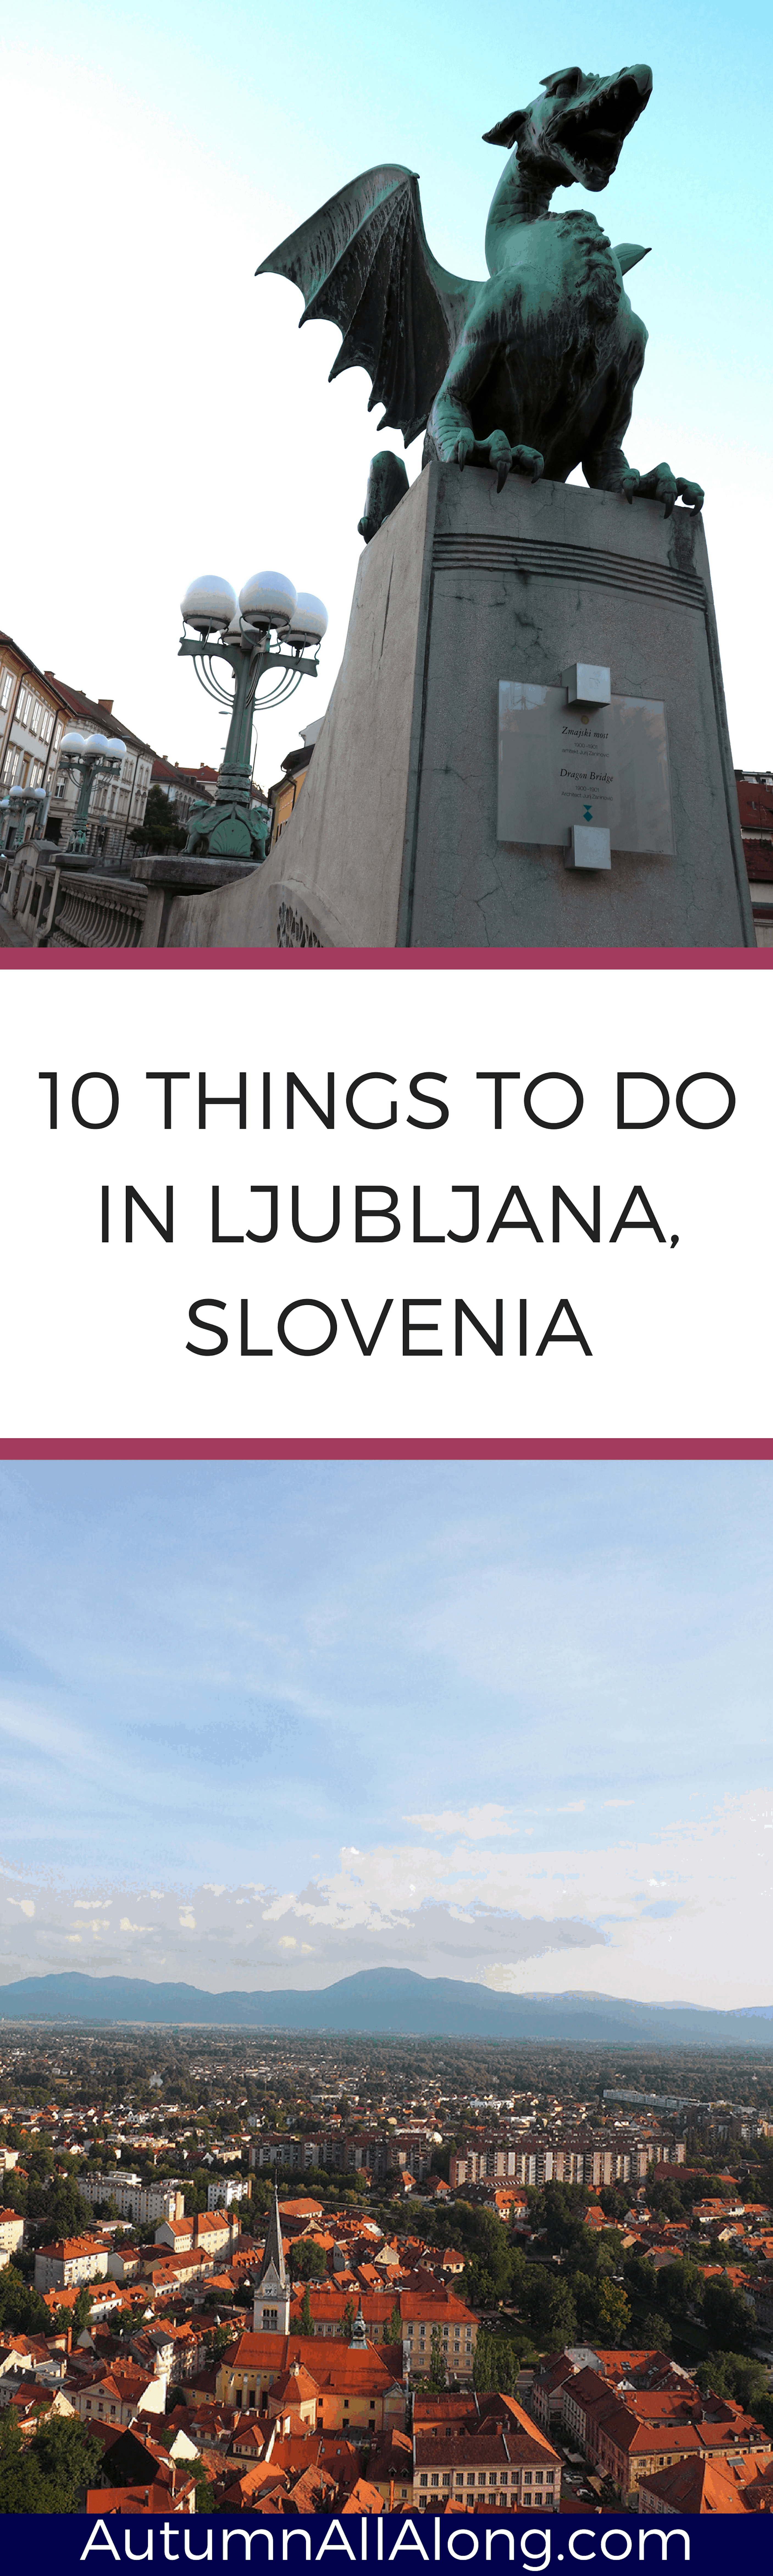 Out of all of the places we've traveled, we found Ljubljana, Slovenia to be our favorite. Here is our 48 hour guide to hotels, restaurants, and activities to do around Slovenia's capitol. | via Autumn All Along